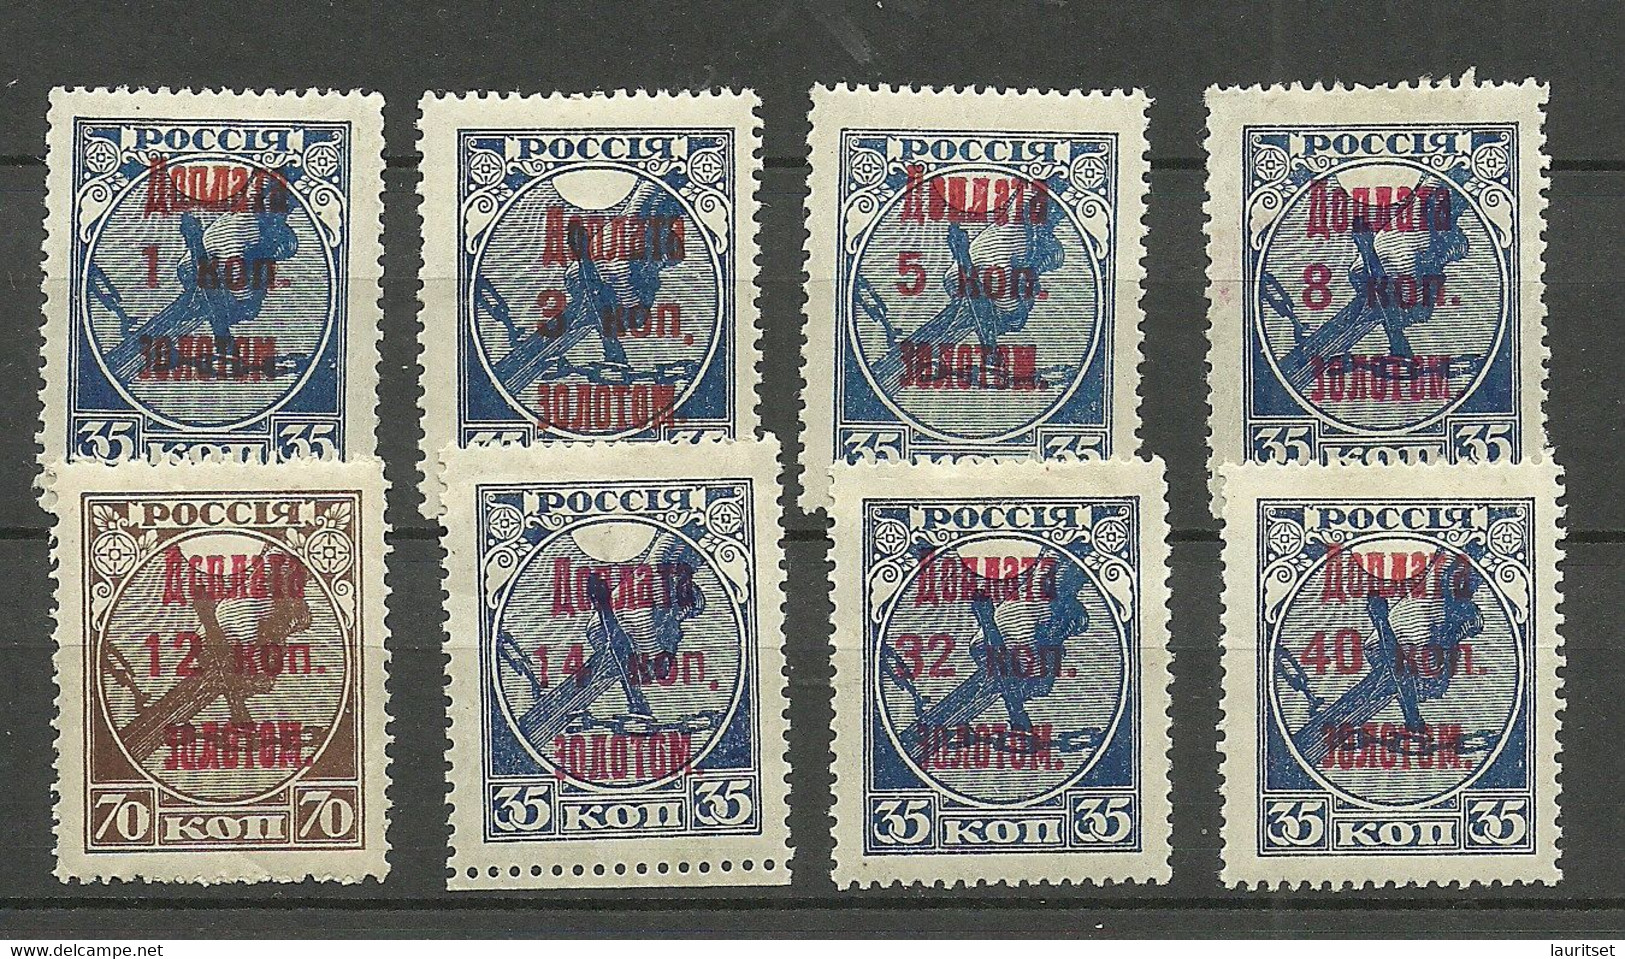 RUSSLAND RUSSIA 1924/25 Postage Due Portomarken = 8 Stamps From Set Michel 1 - 9 MNH/MH Incl. Variety Set Off Of OPT - Impuestos